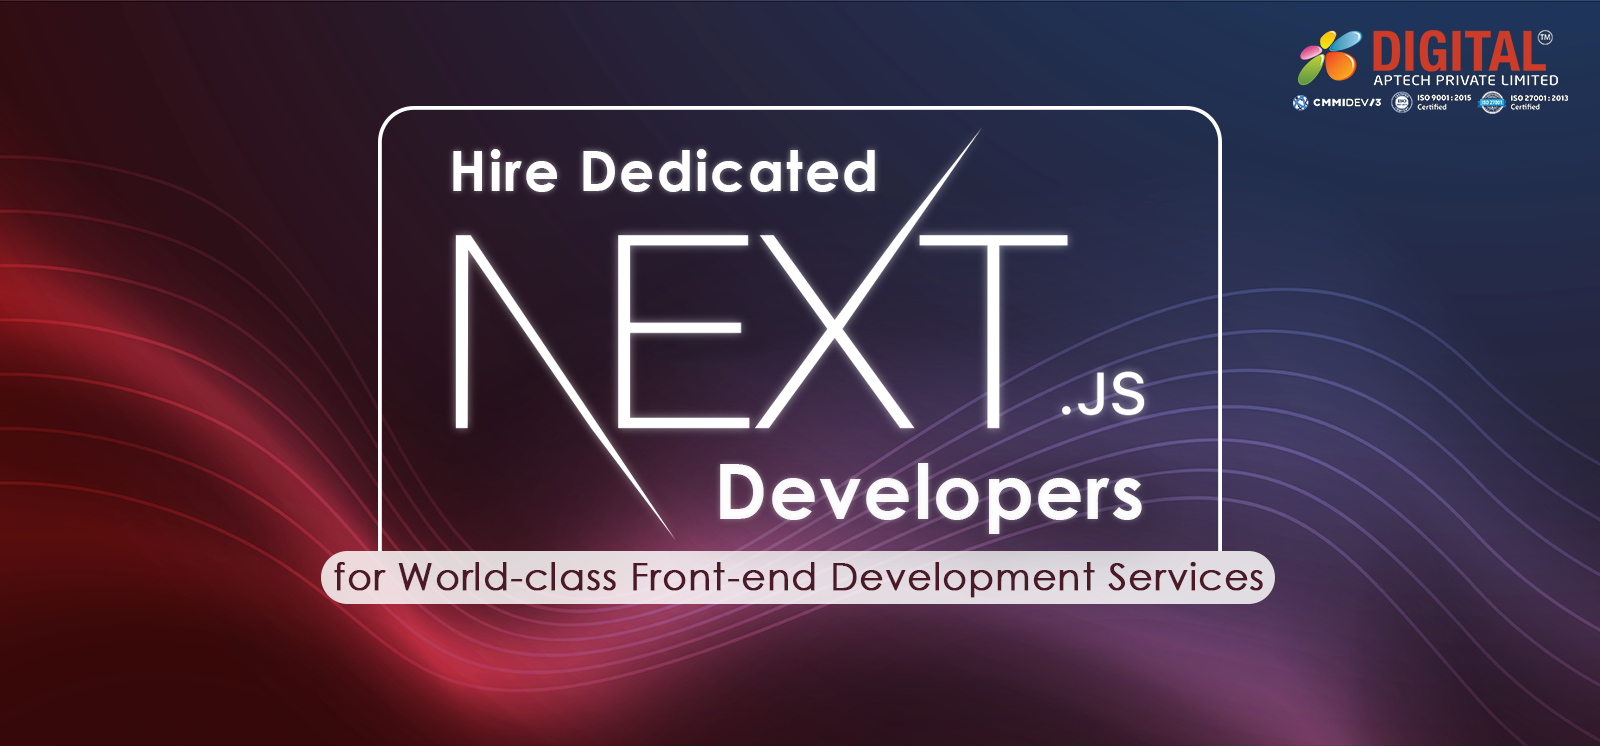 Hire Dedicated Next.Js Developers for World-Class Front-End Development Services